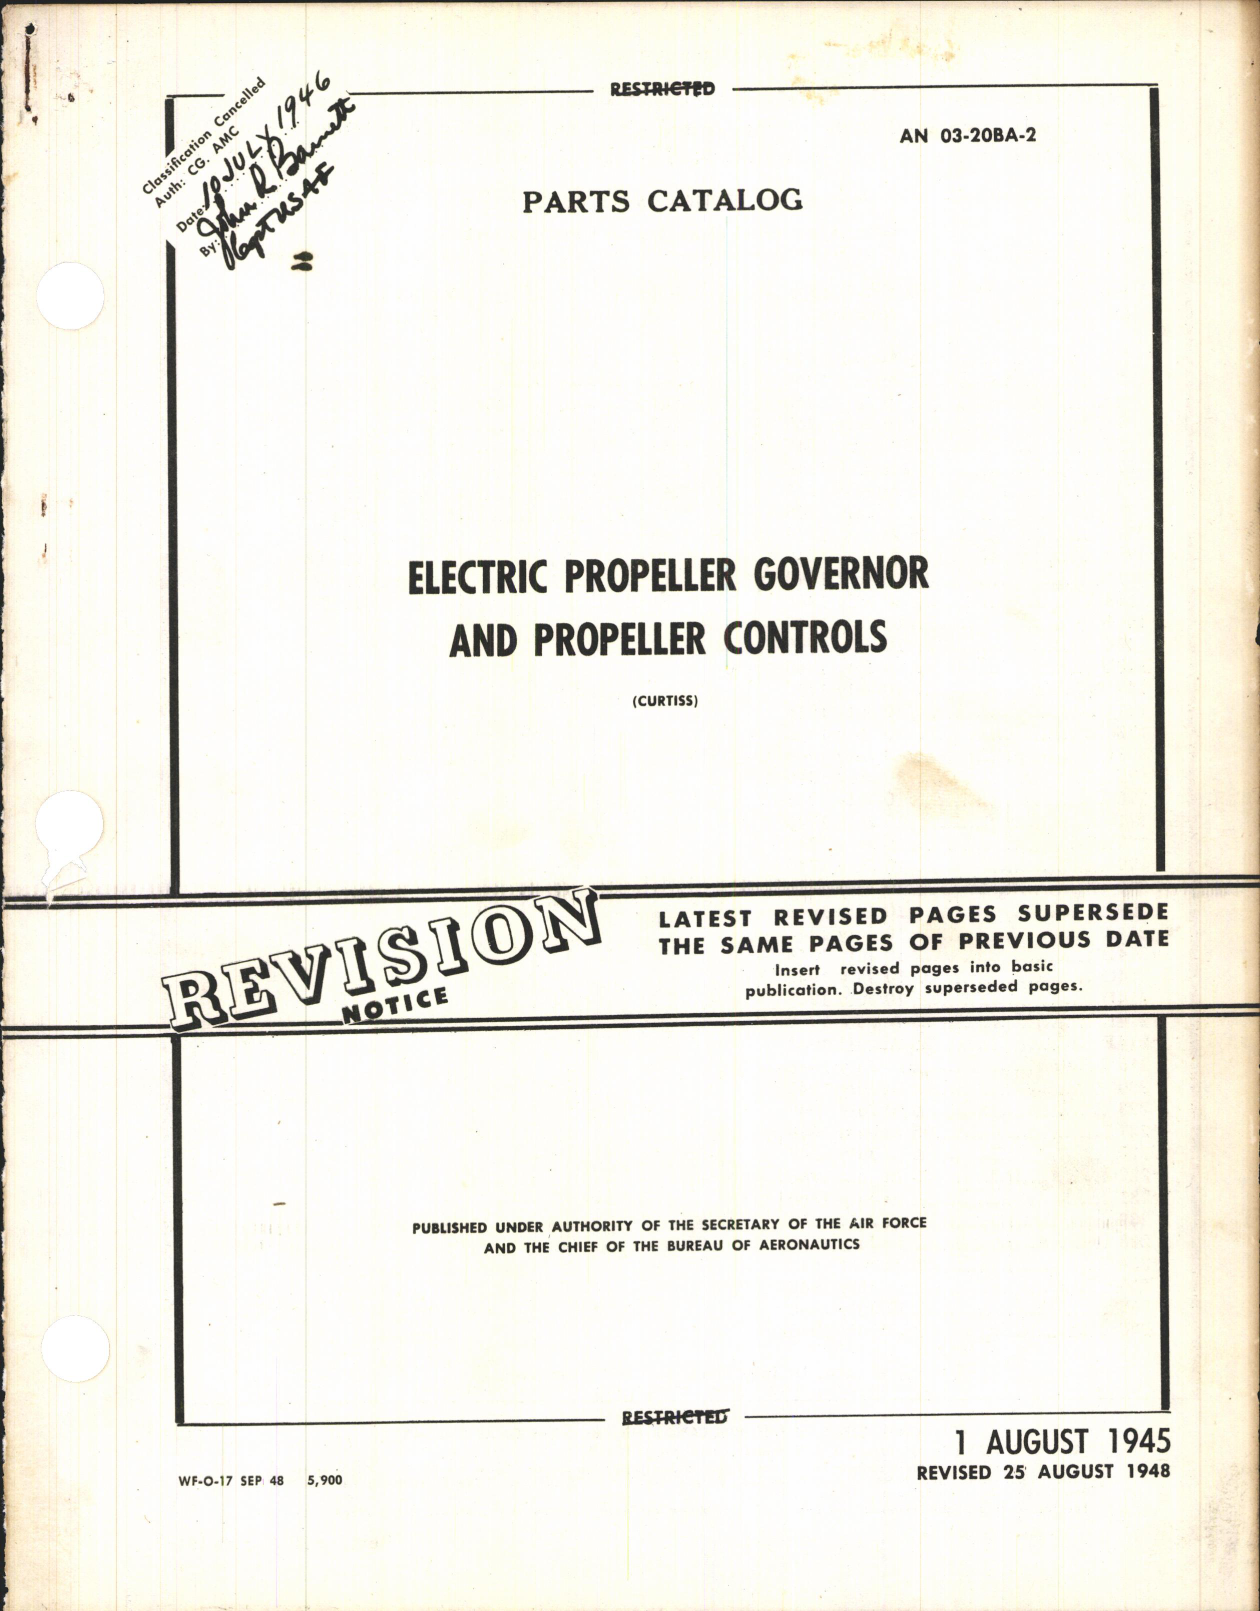 Sample page 1 from AirCorps Library document: Parts Catalog for Electric Propeller Governor and Propeller Controls